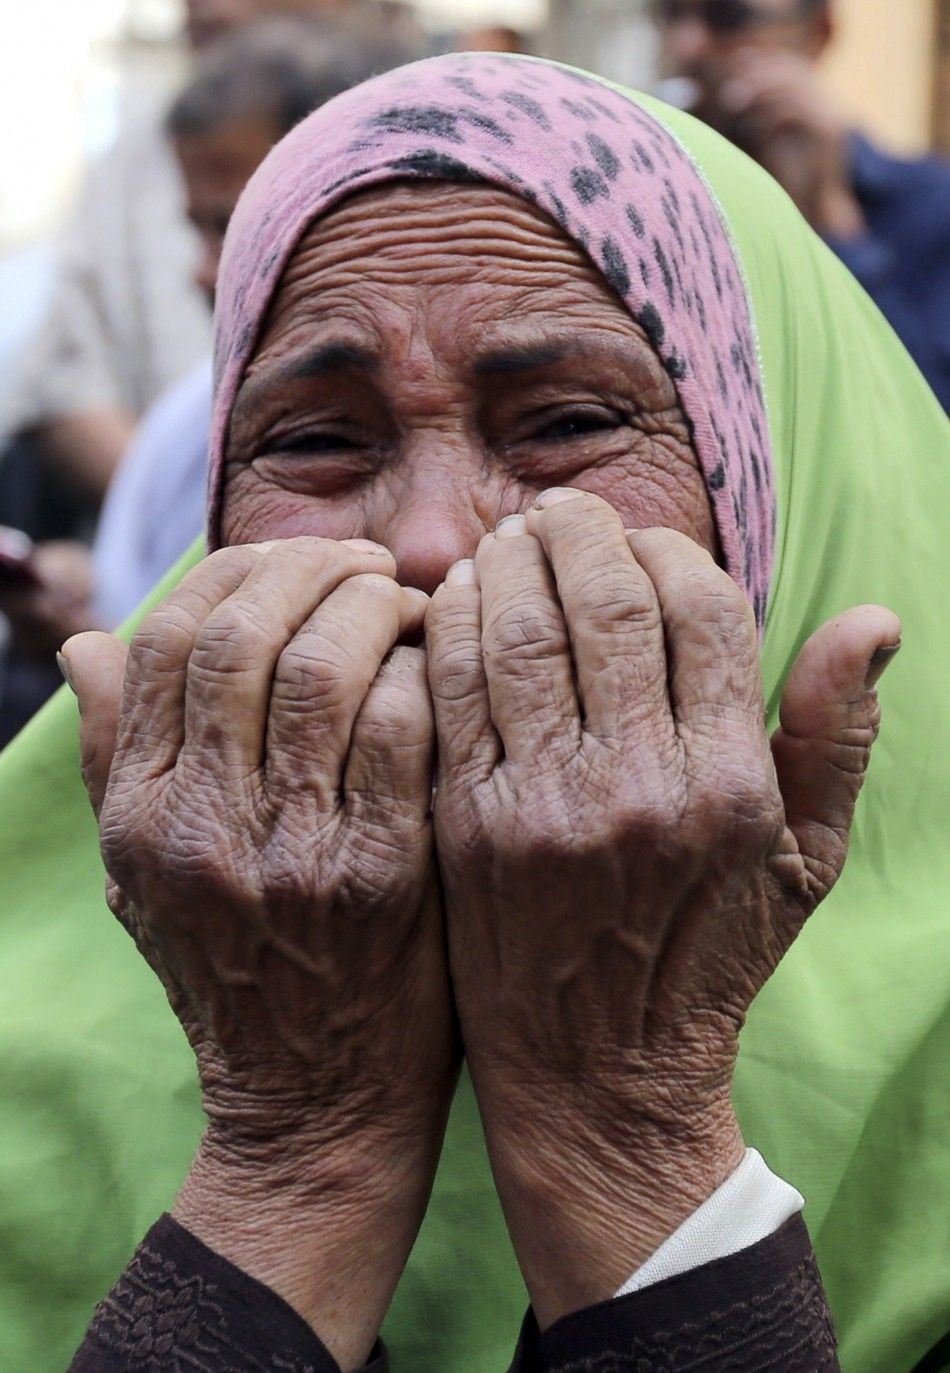 The mother of an accused supporter of ousted President Mohamed Mursi reacts in front of the court in Minya, south of Cairo, after hearing the sentence handed to Muslim Brotherhood leader Mohamed Badie and other Brotherhood supporters April 28, 2014. An Eg